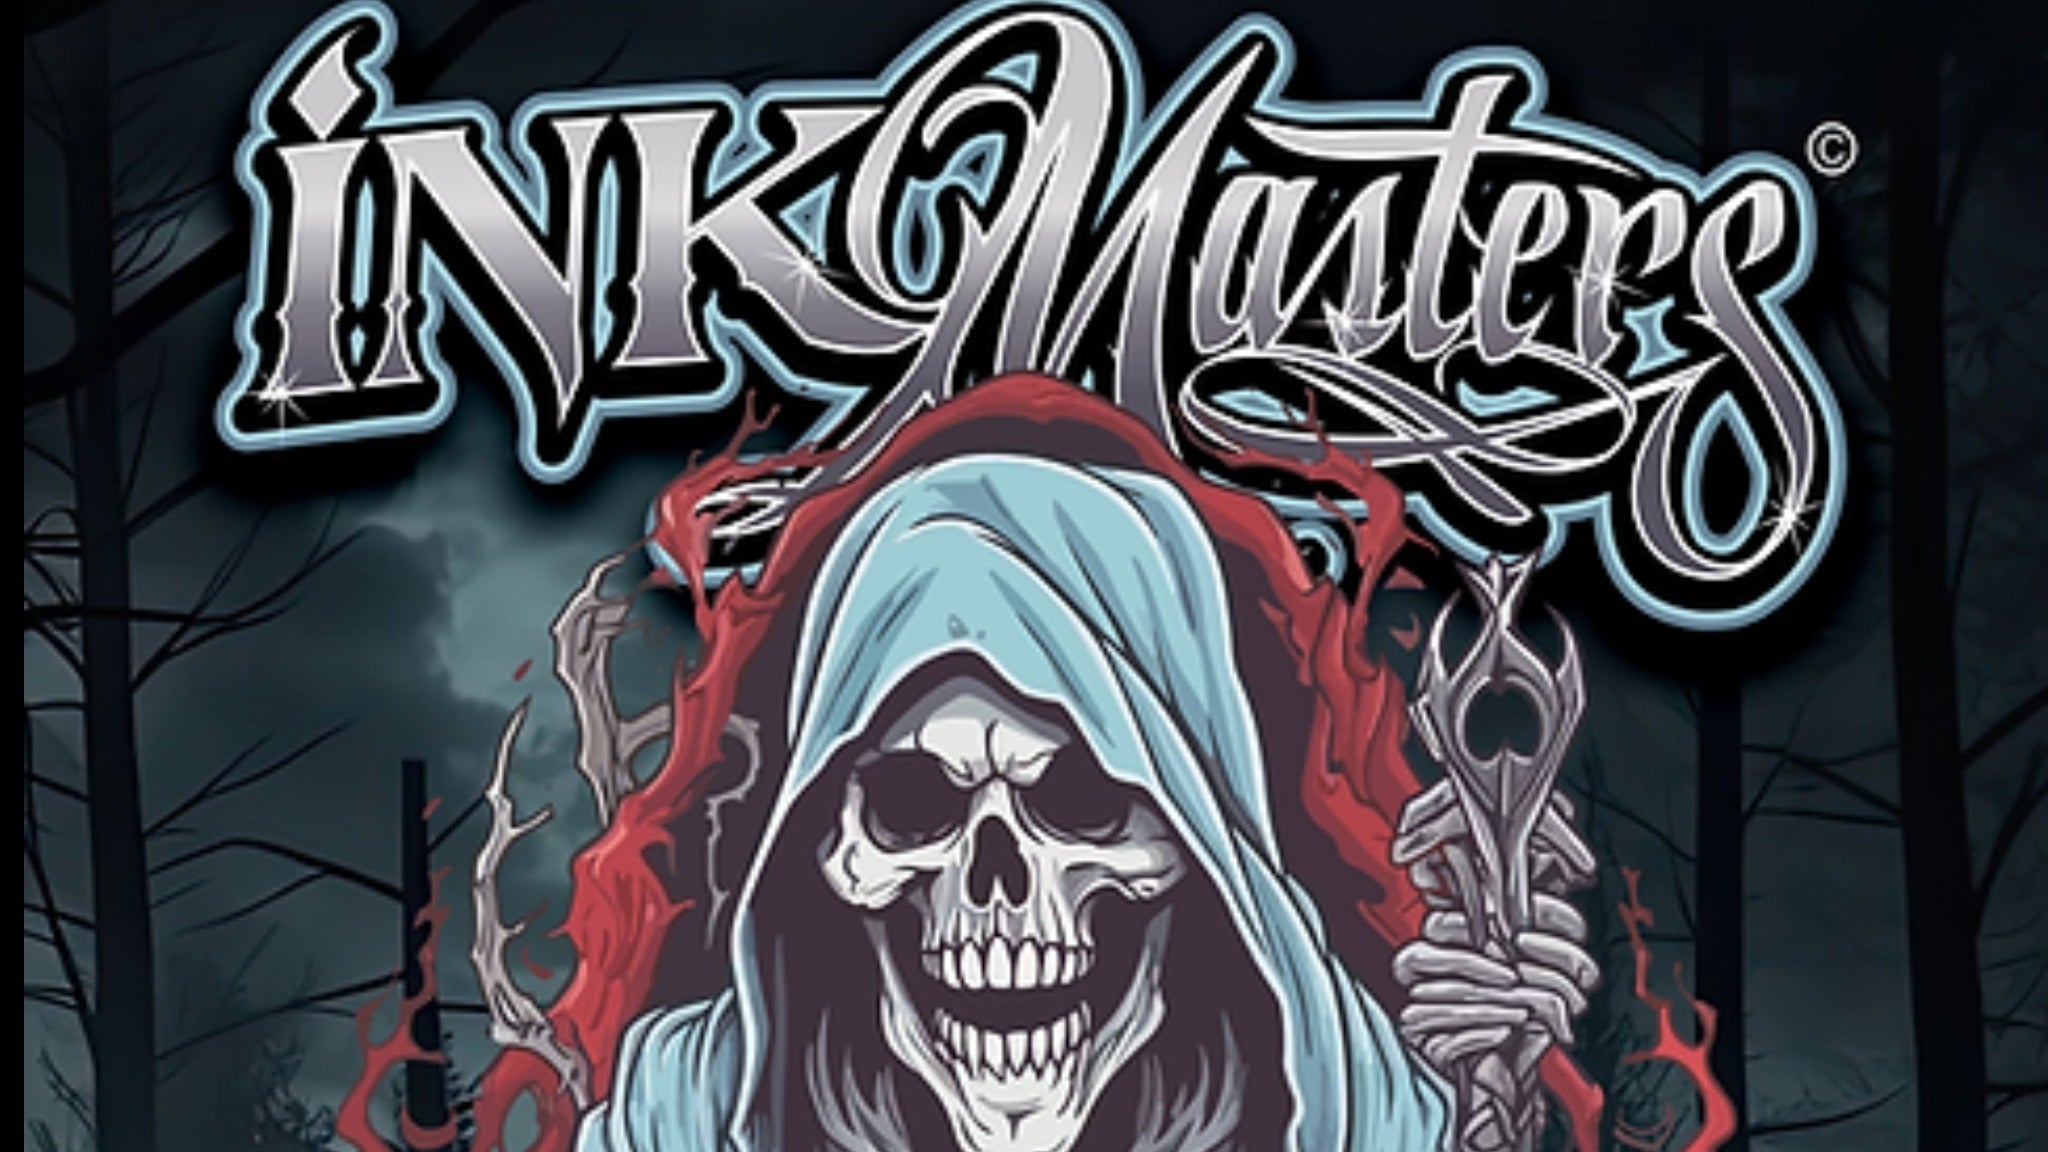 Ink Masters Tattoo Expo: 3 Day Weekend Pass in Casper promo photo for Early Bird presale offer code